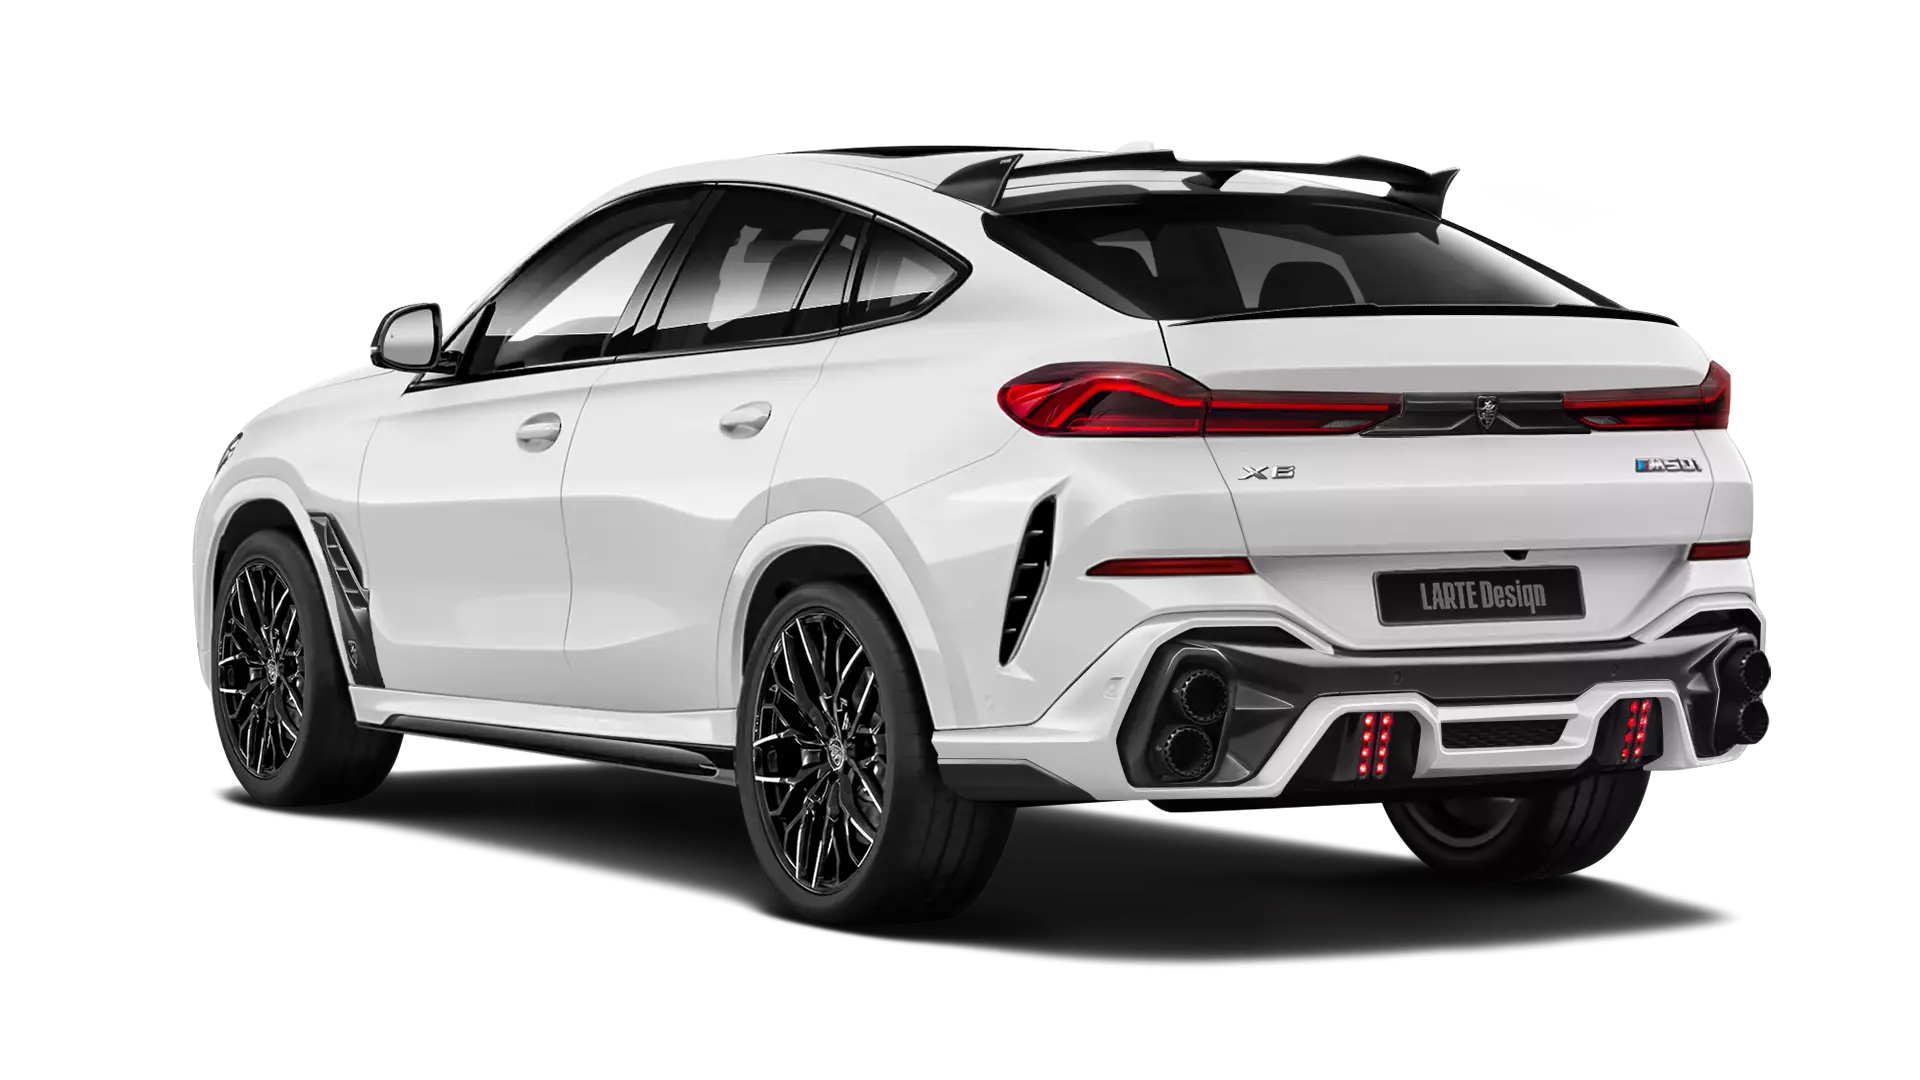 BMW X6 G06 with painted body kit: rear view shown in Snow White